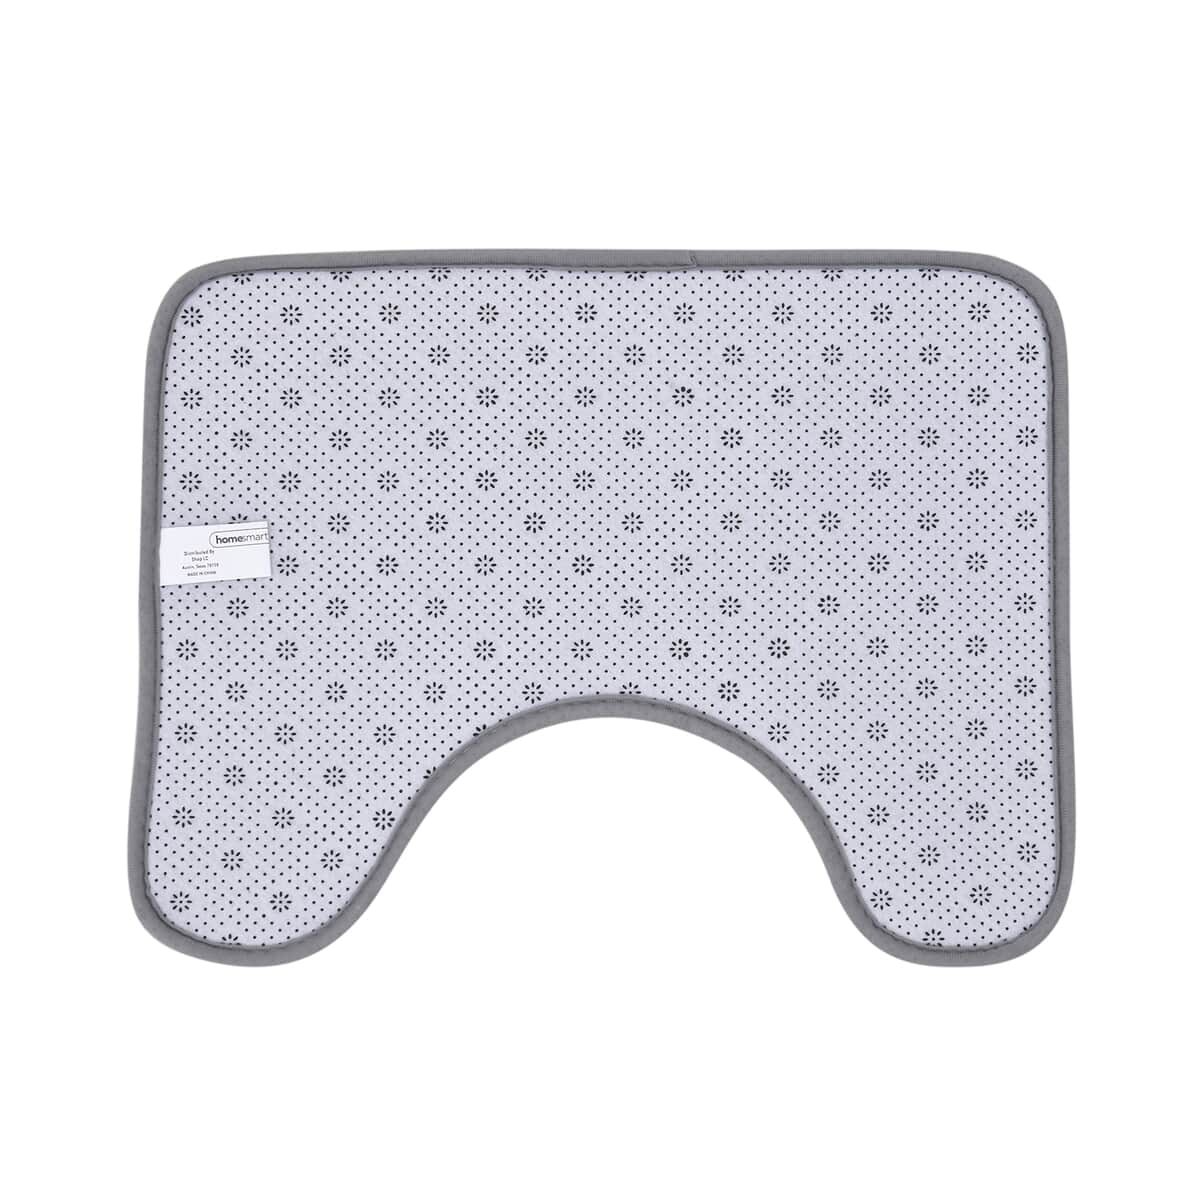 Gray Embossed Flannel Rectangular Bathmat and Contour Toilet Mat image number 5